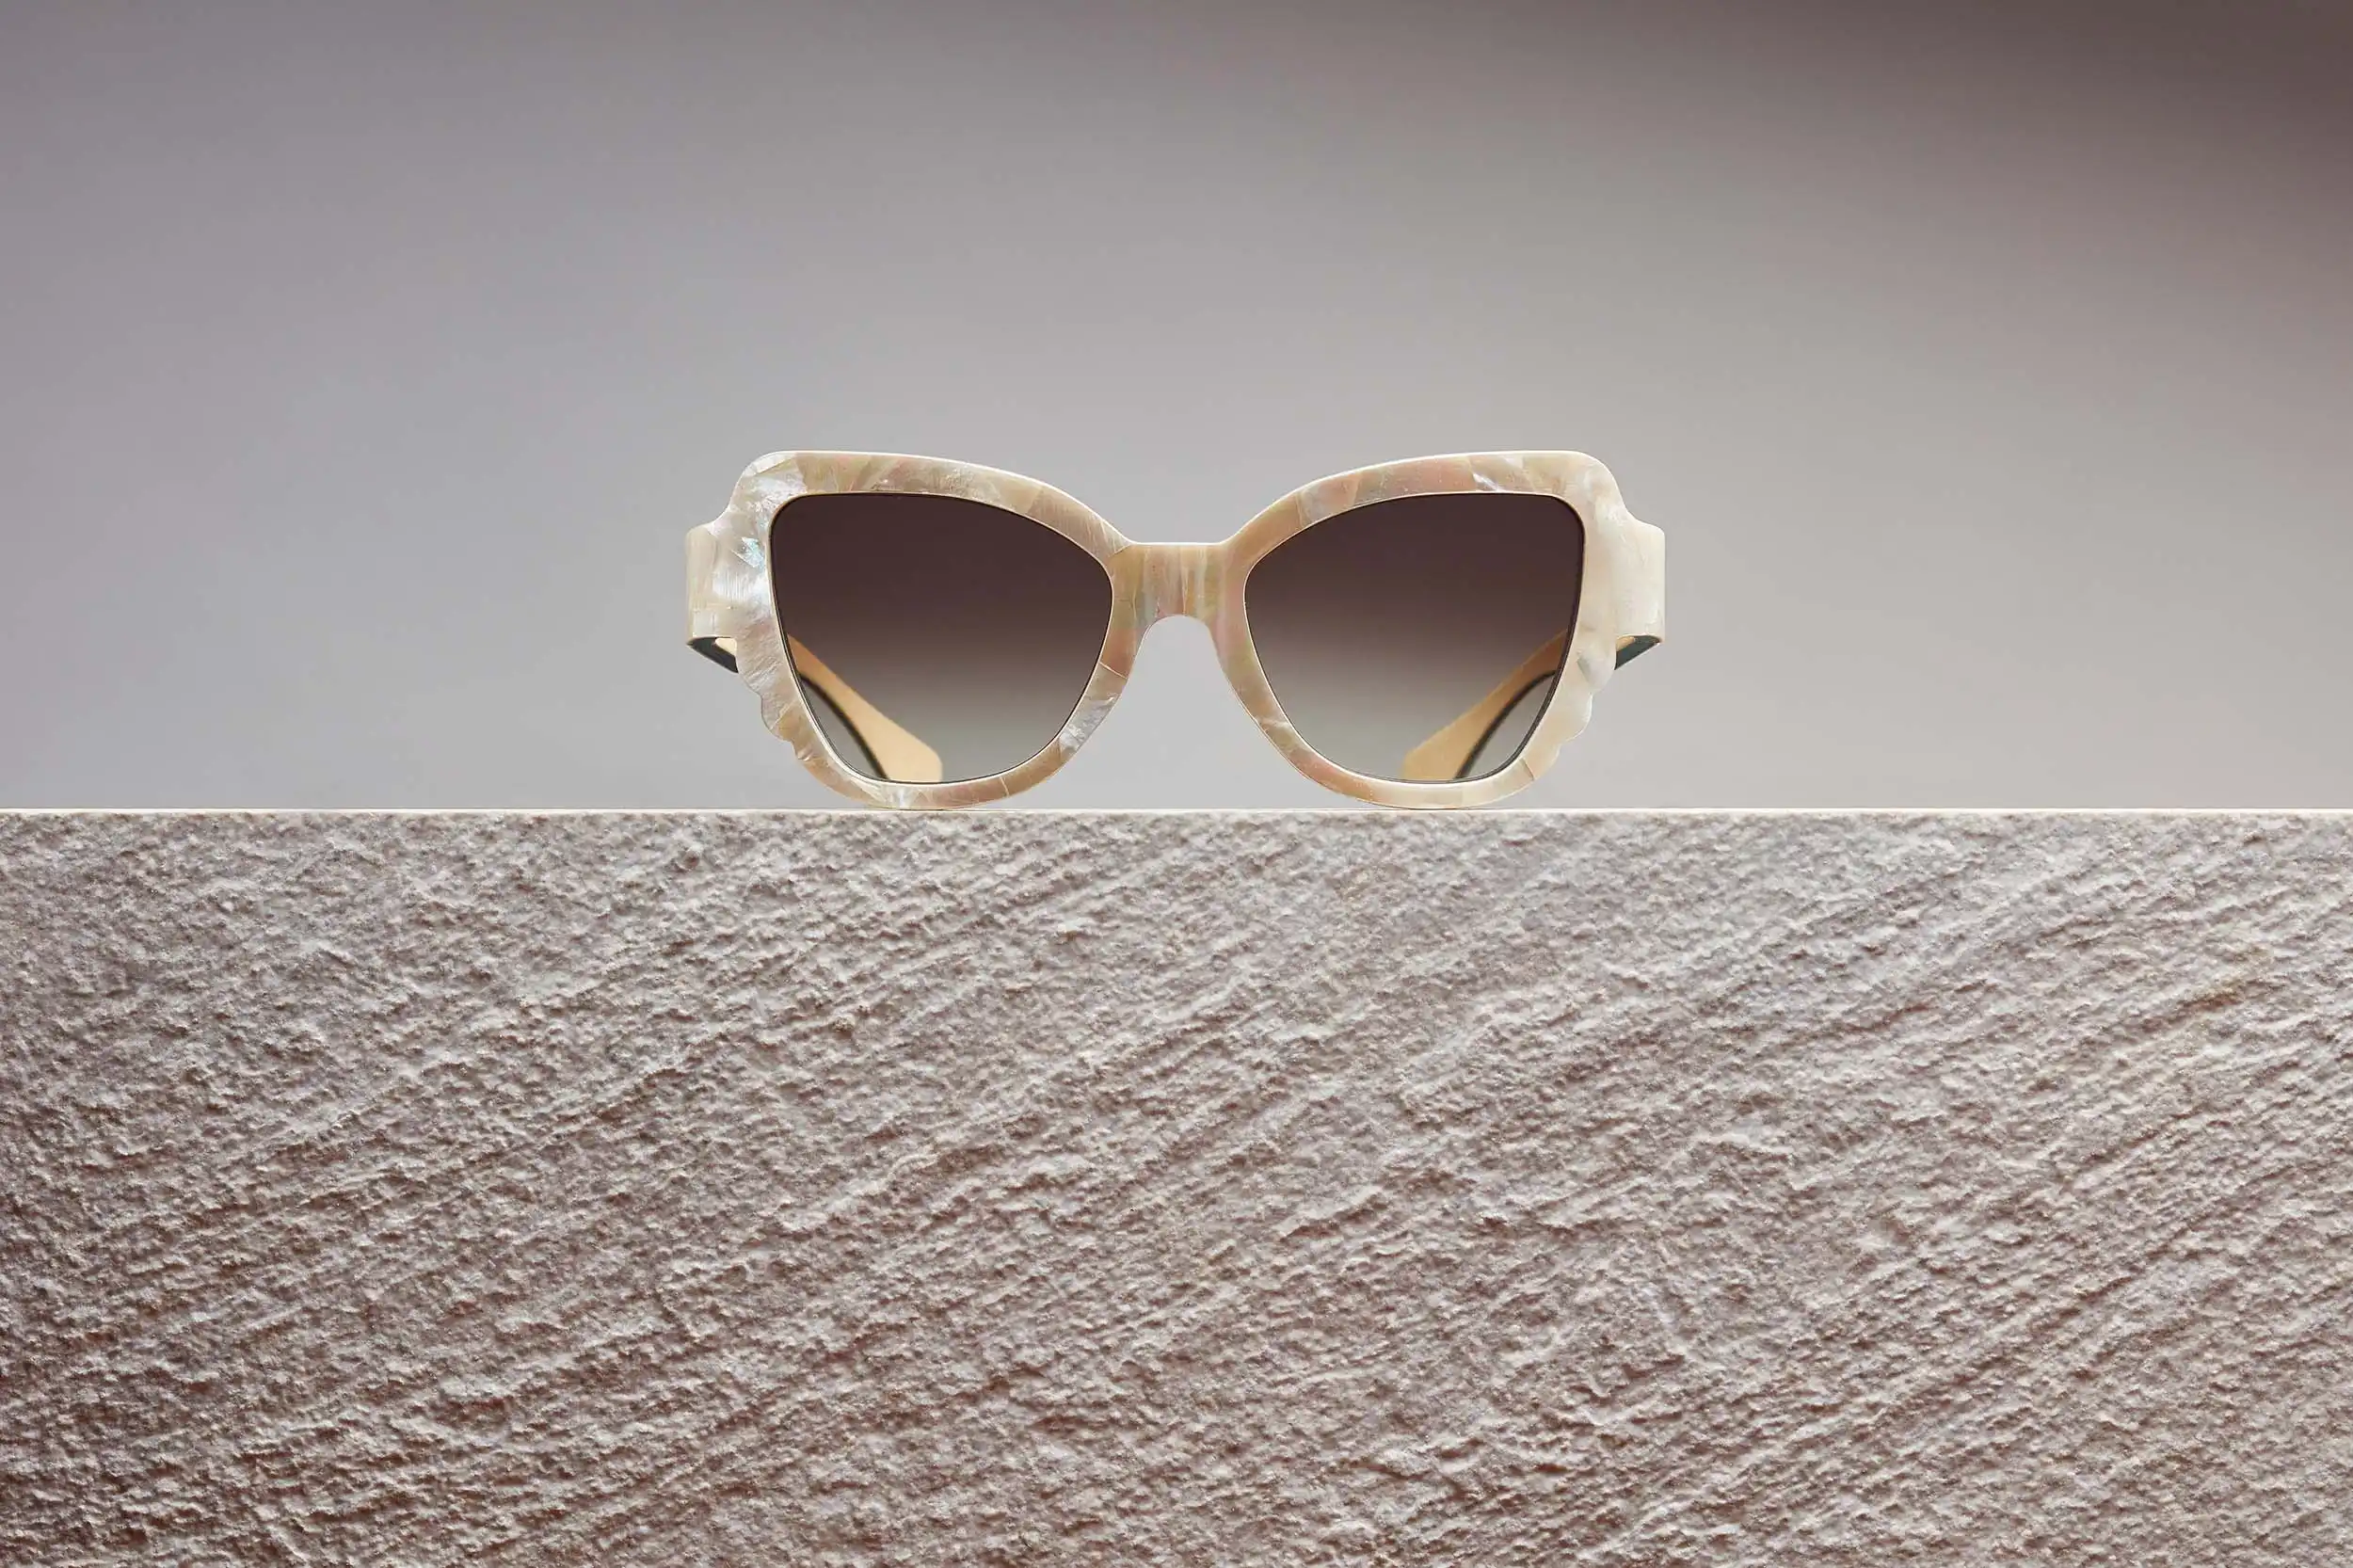 luxury, creating sunglasses that combine innovative design with a touch of natural elegance, making them a desirable choice for fashion-conscious individuals seeking stylish eye protection with a unique and captivating allure.